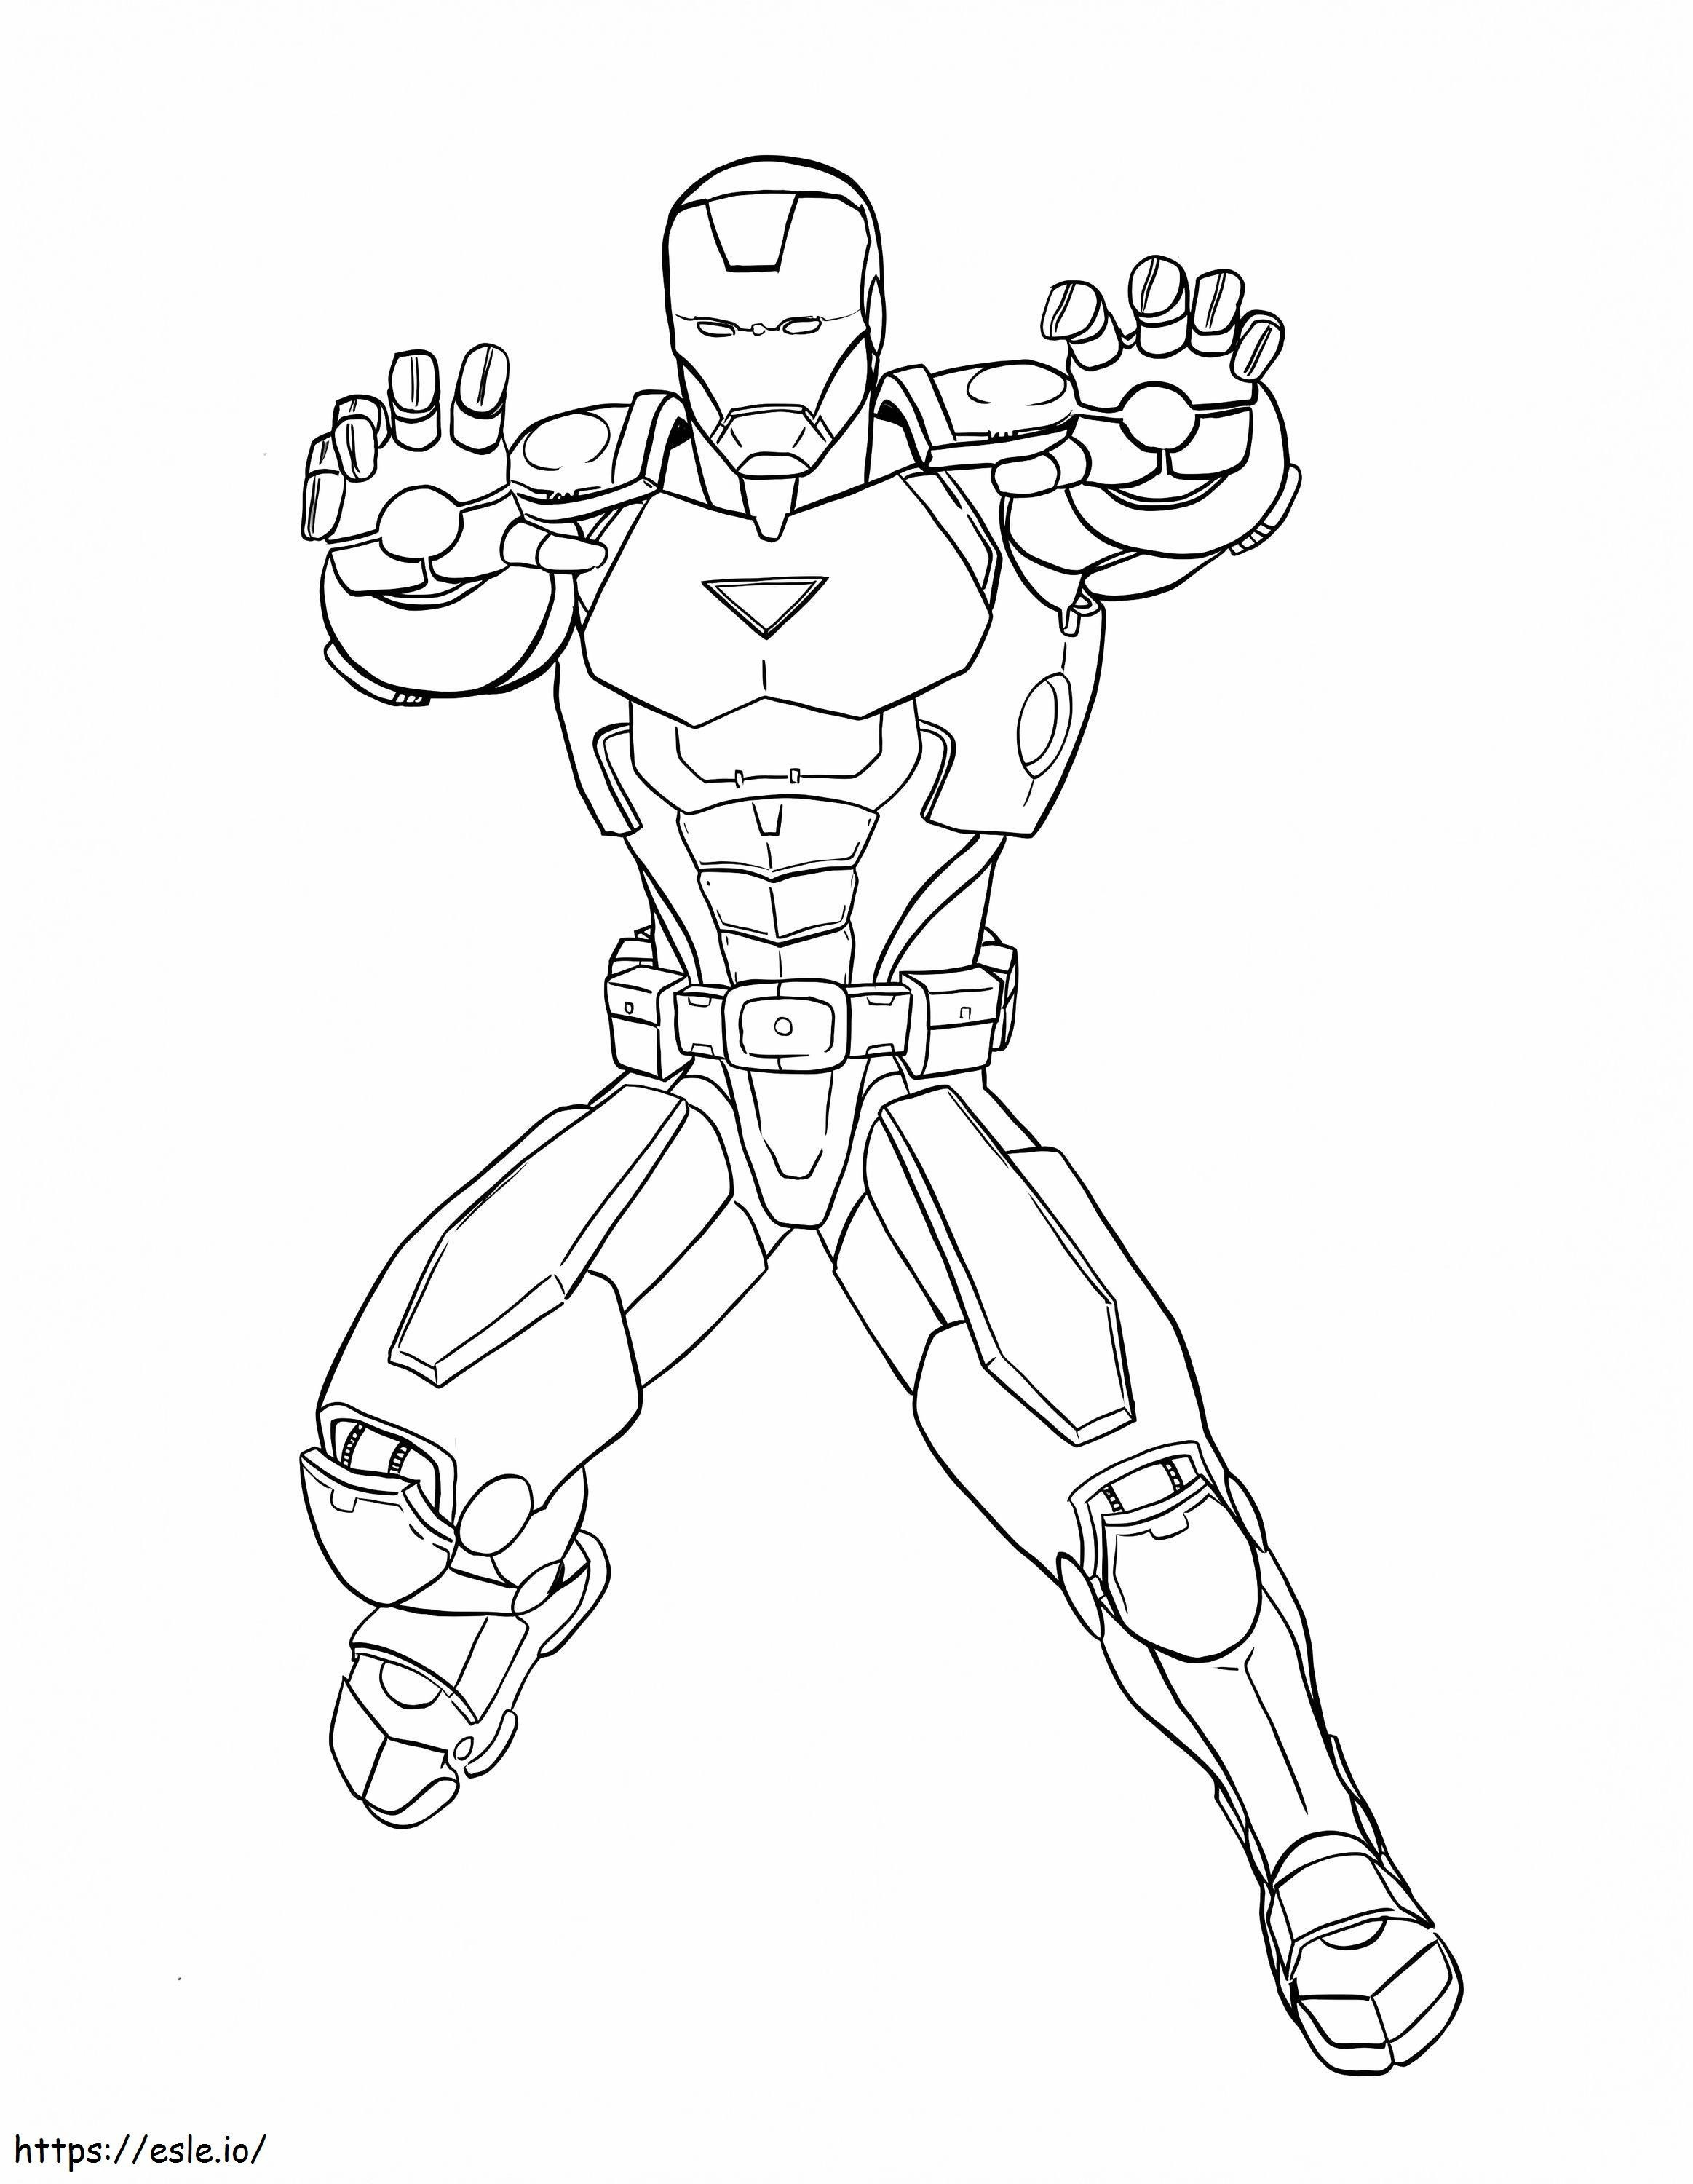 Awesome Iron Man coloring page